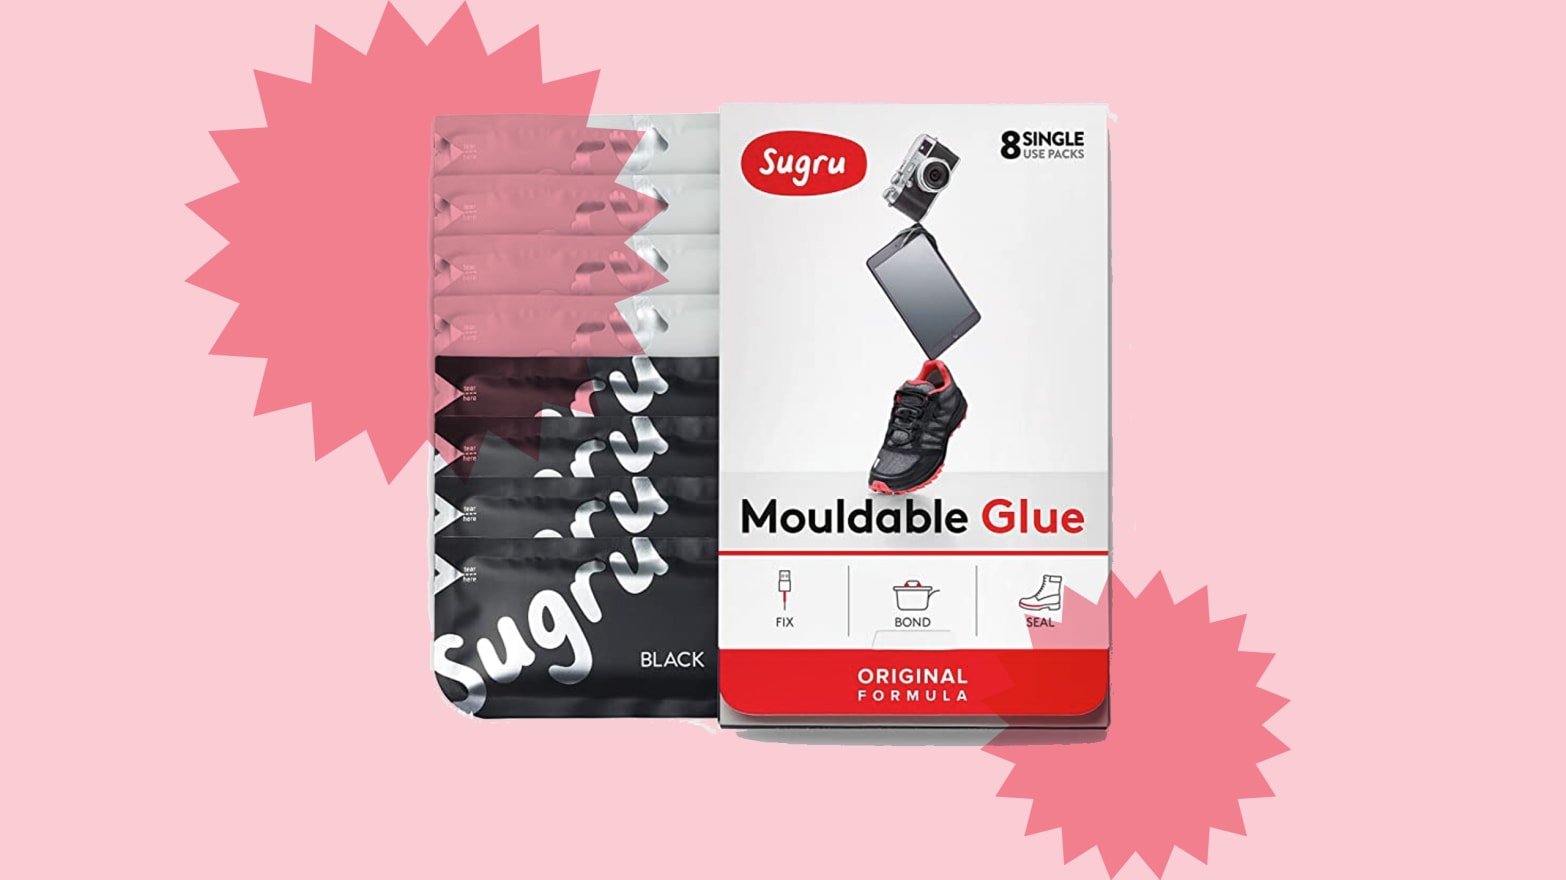 Best Moldable Glue for Home Fixes and Improvement